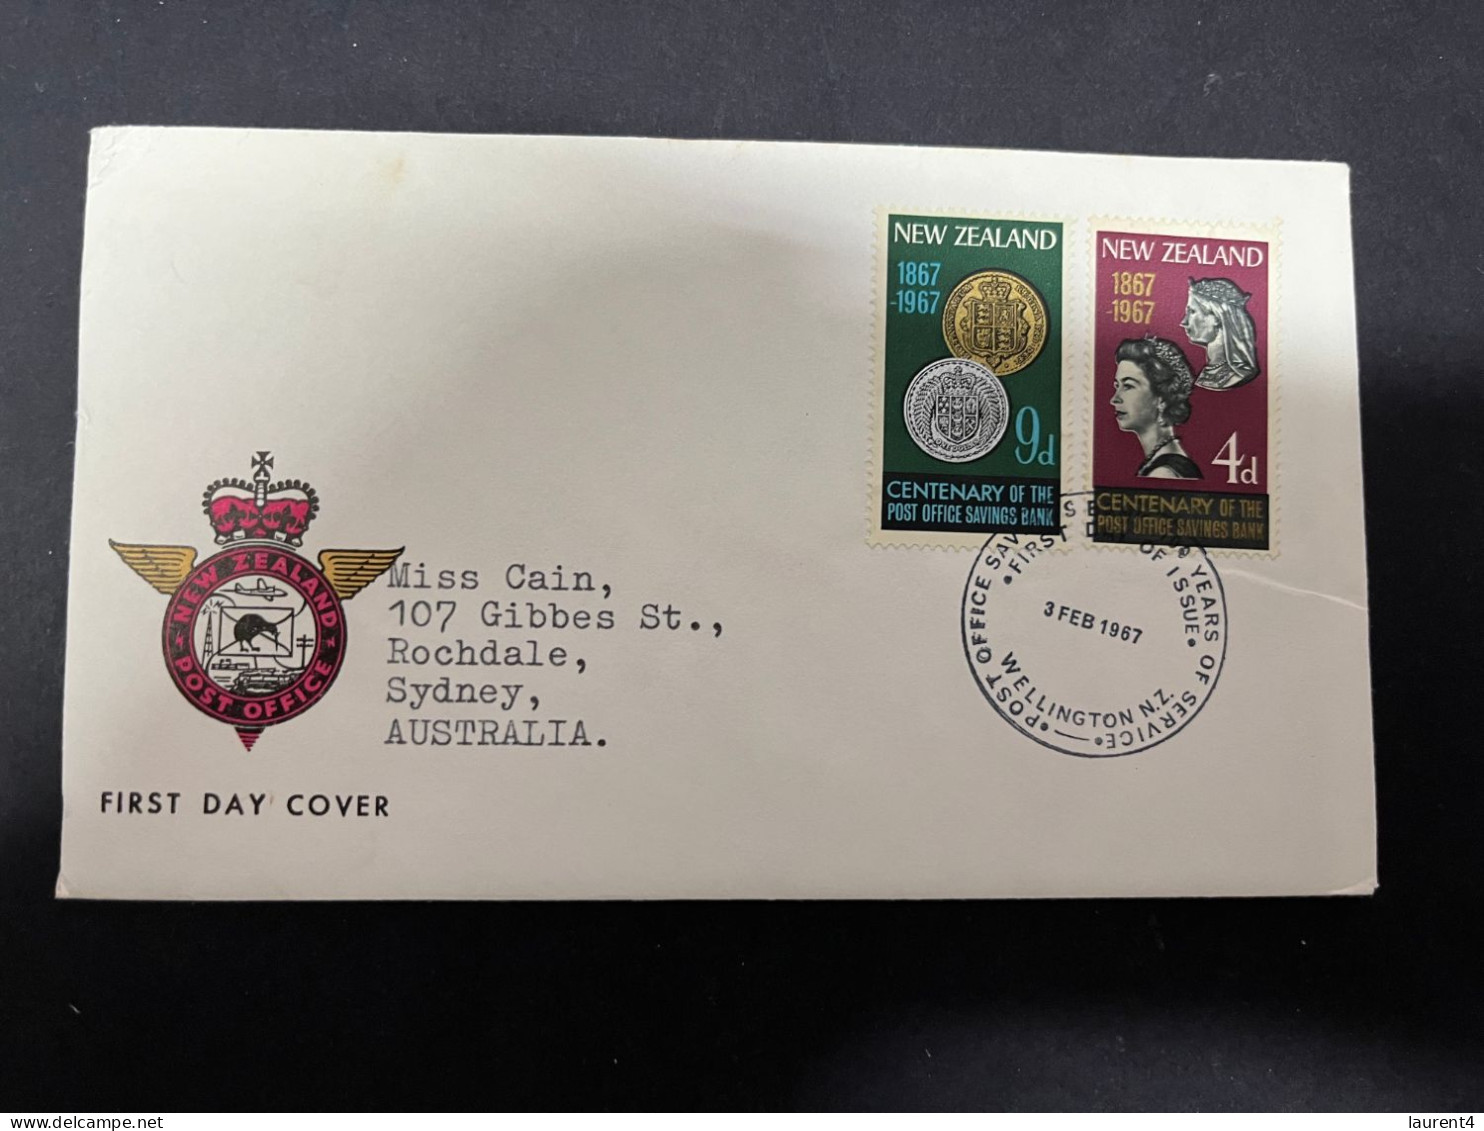 3-5-2024 (4 Z 4) FDC New Zealand Letter (posted To Australia) 1967 - Post Office Saving Plans - FDC